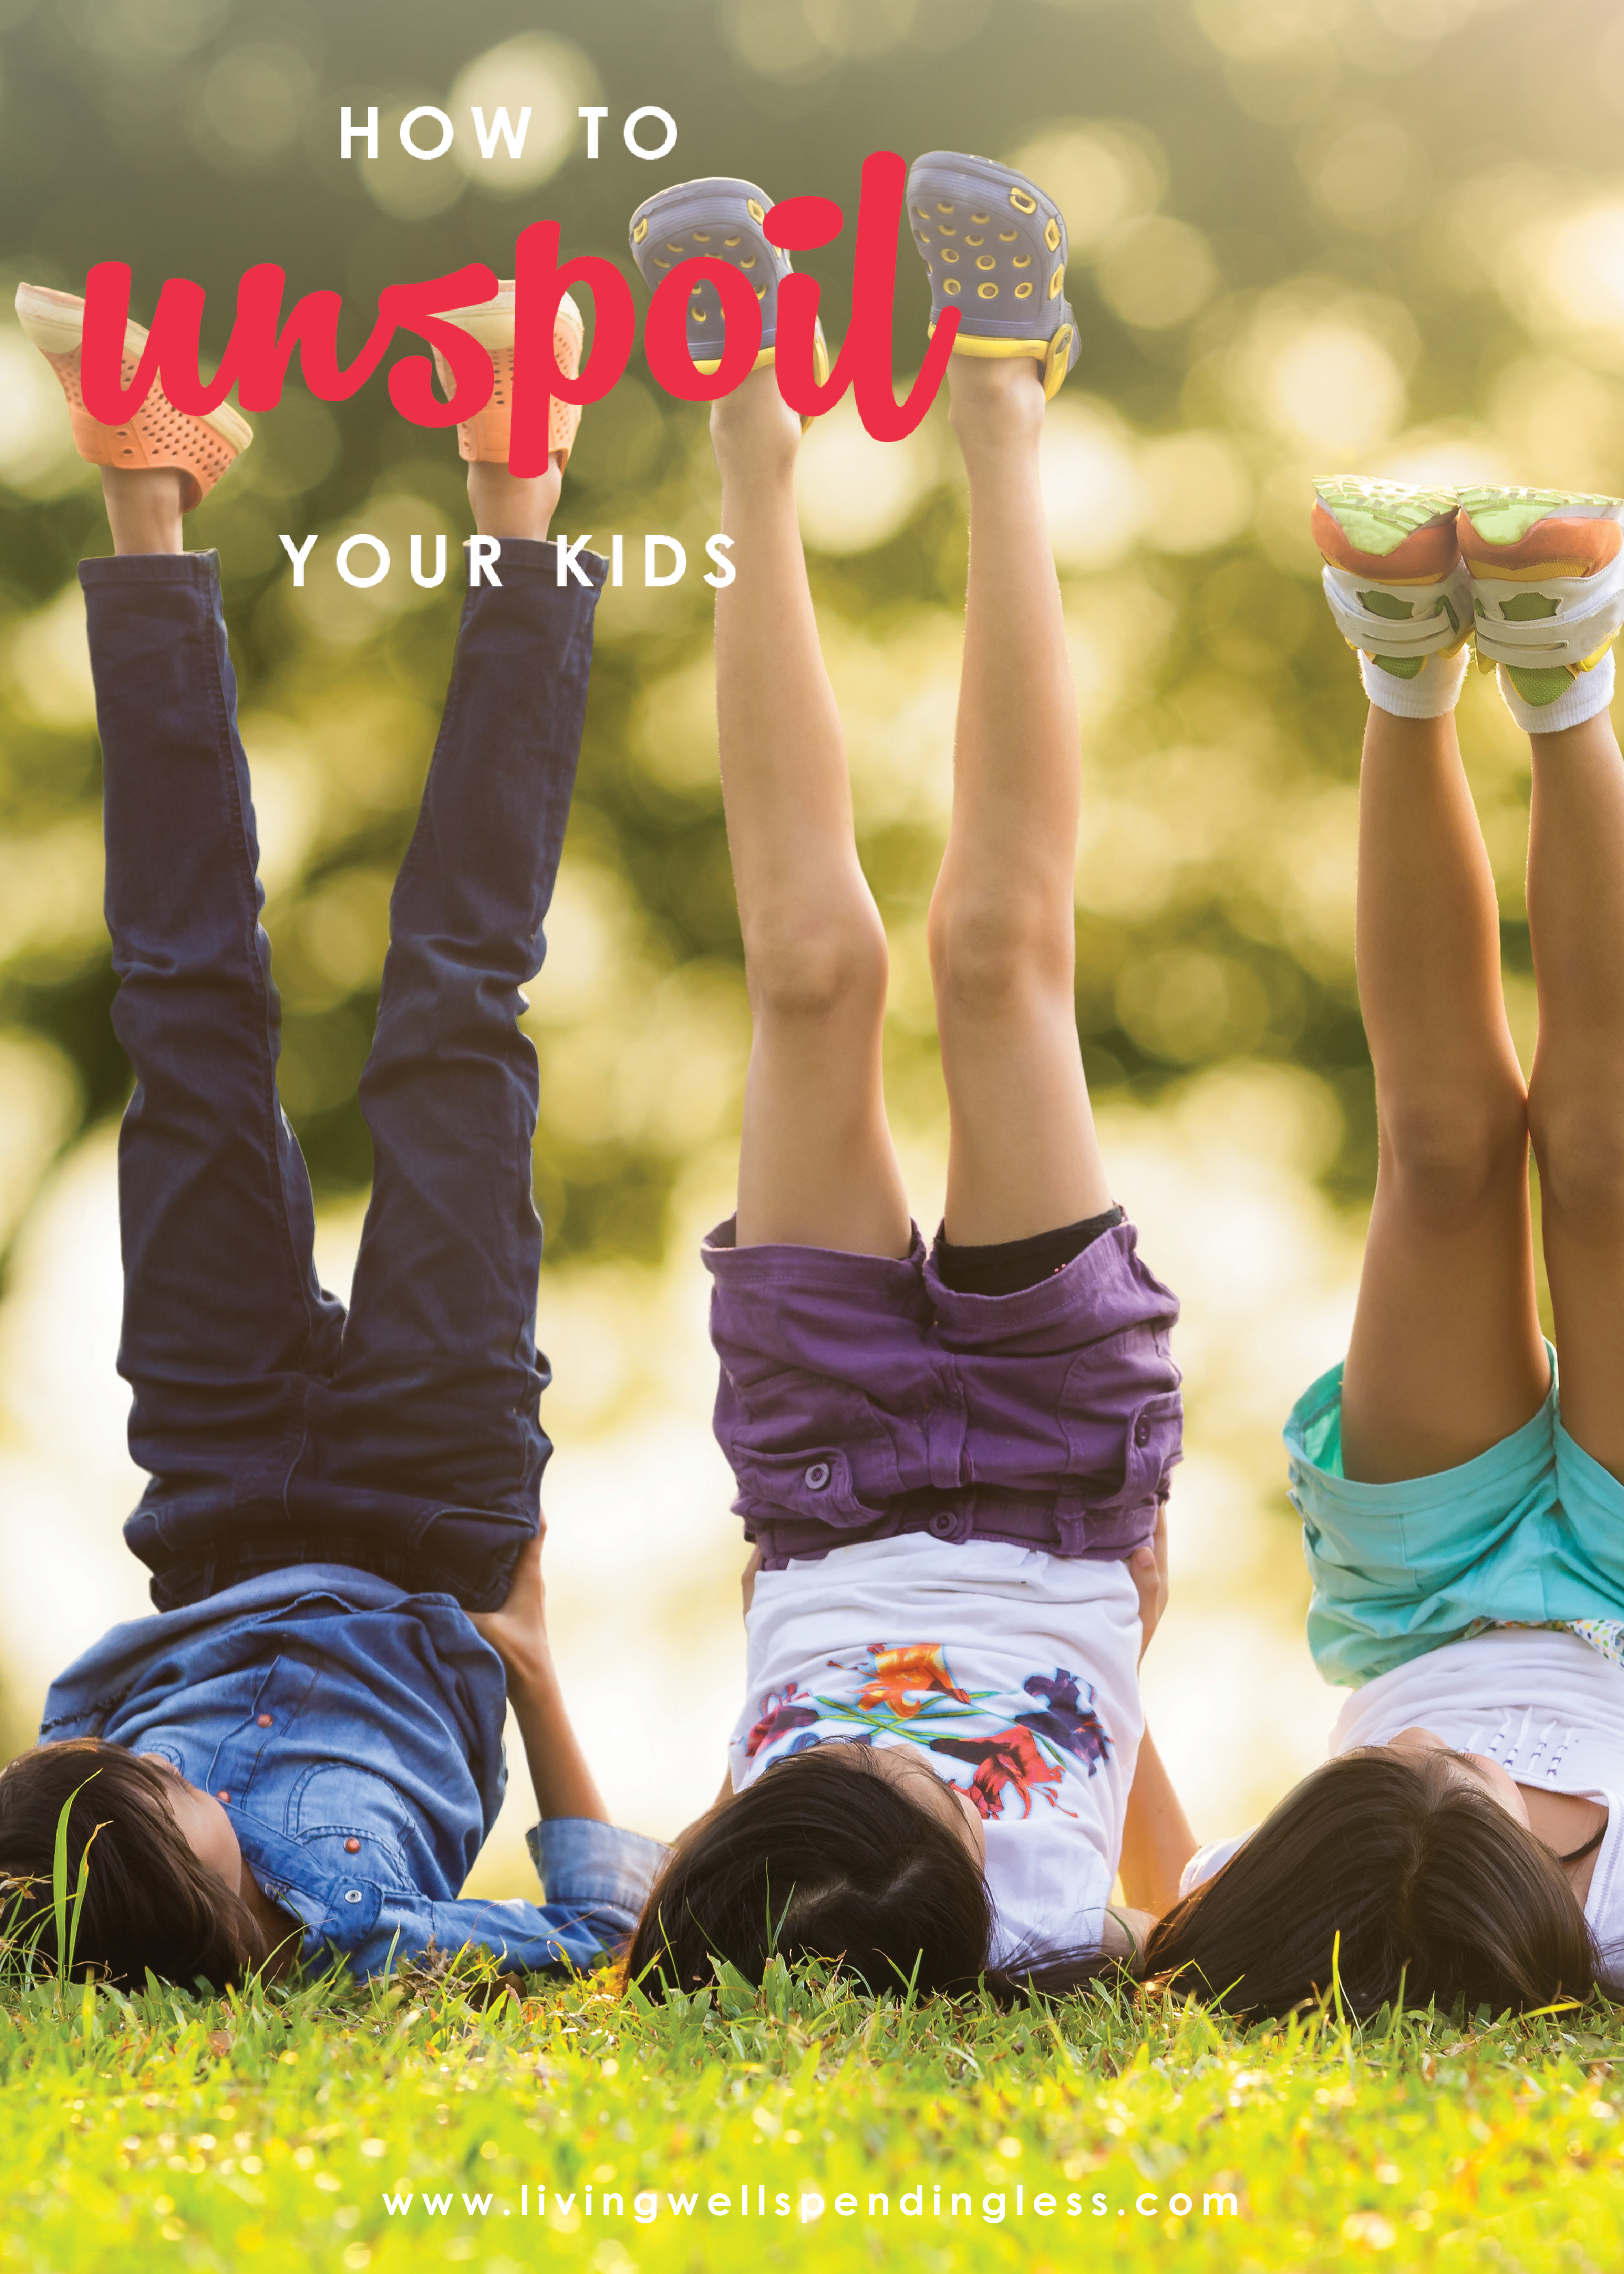 Parenting is hard sometimes! We try to do our best, but sometimes our kids just act…spoiled! Don't miss these five smart ideas for encouraging good behavior and raising kids you actually like being around!